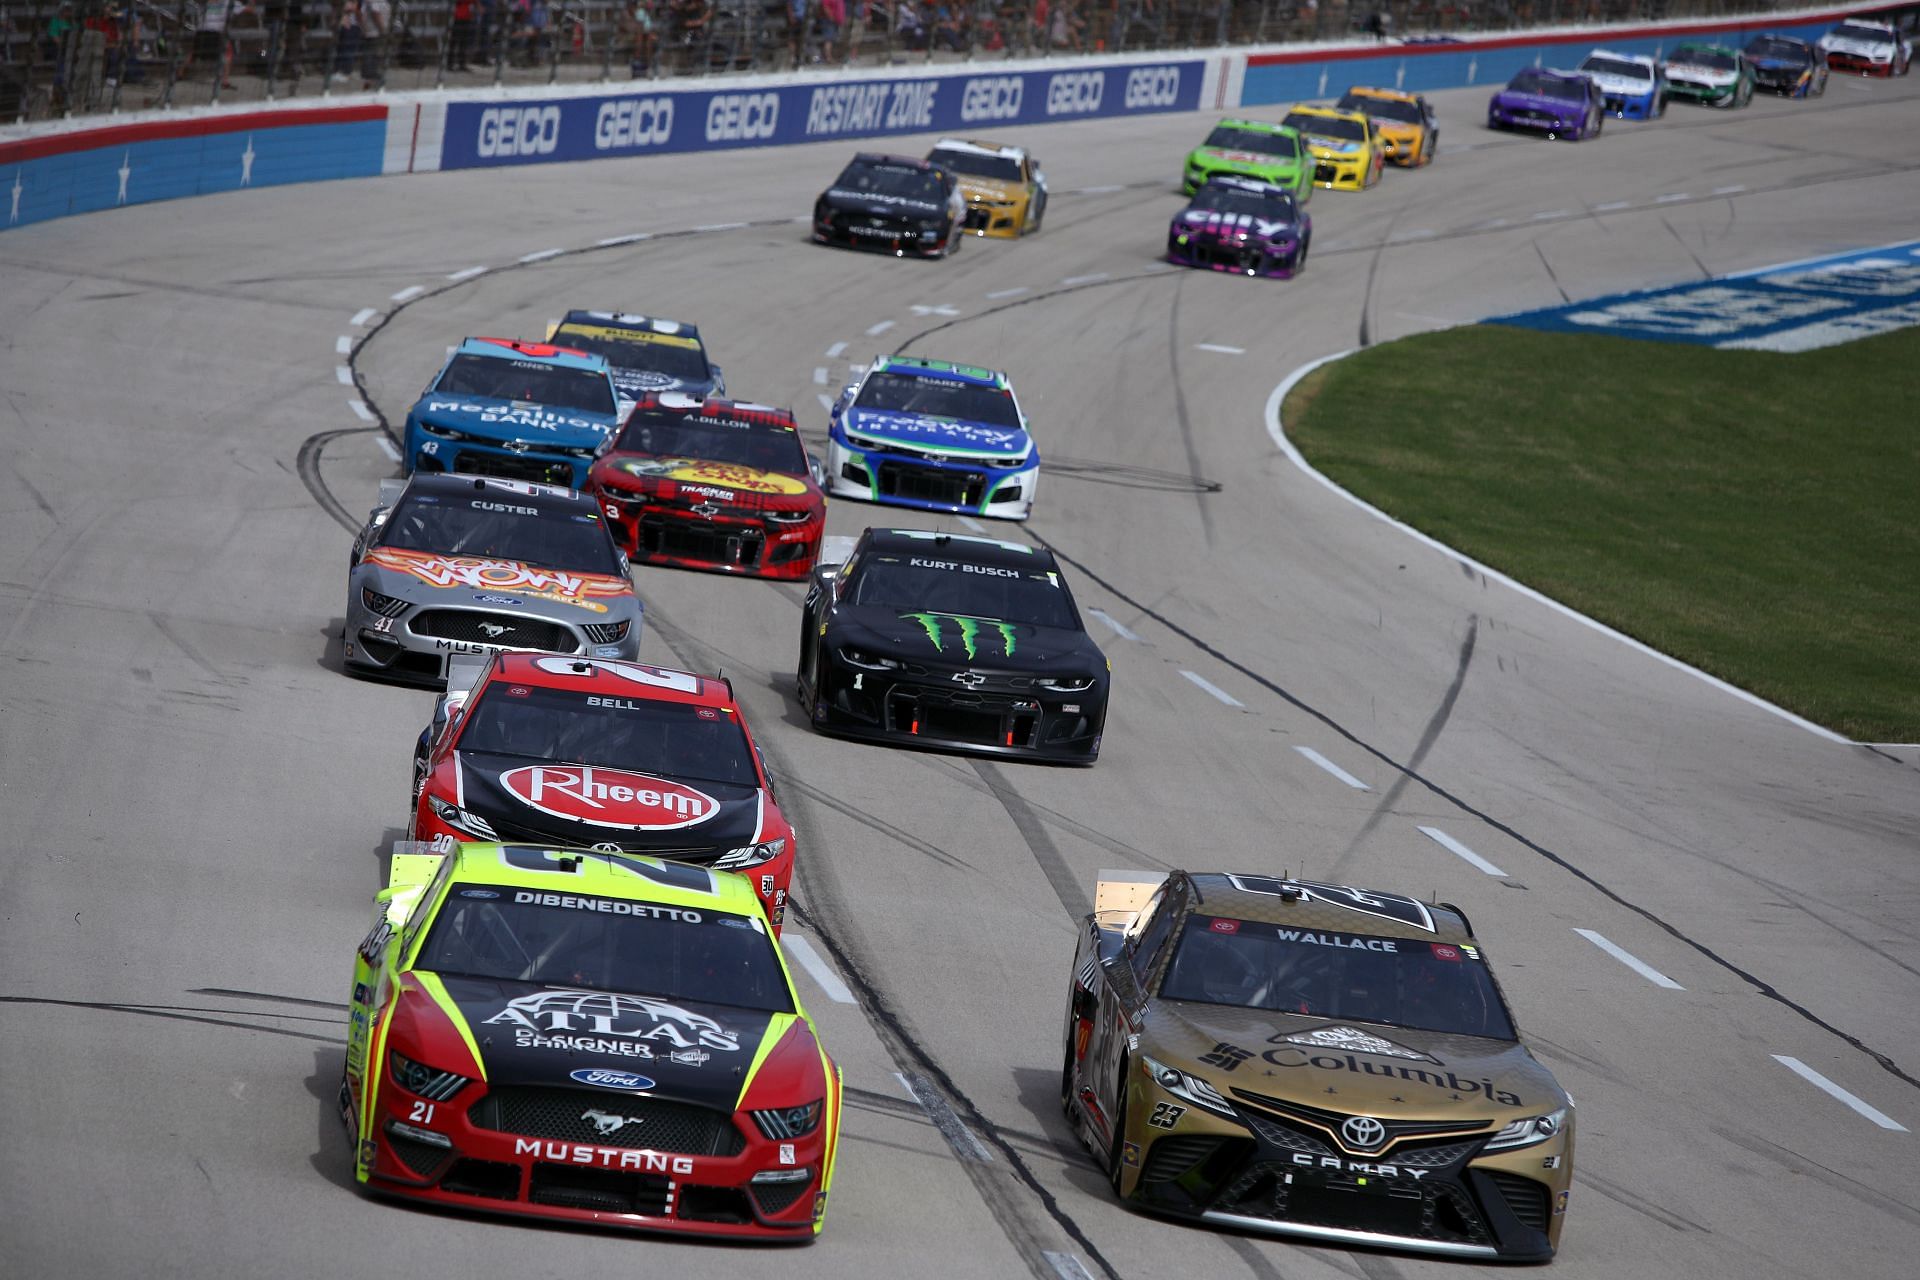 NASCAR 2022 Where to watch AutoTrader EchoPark Automotive 500 at Texas Motor Speedway qualifying? Time, TV Schedule and Live Stream